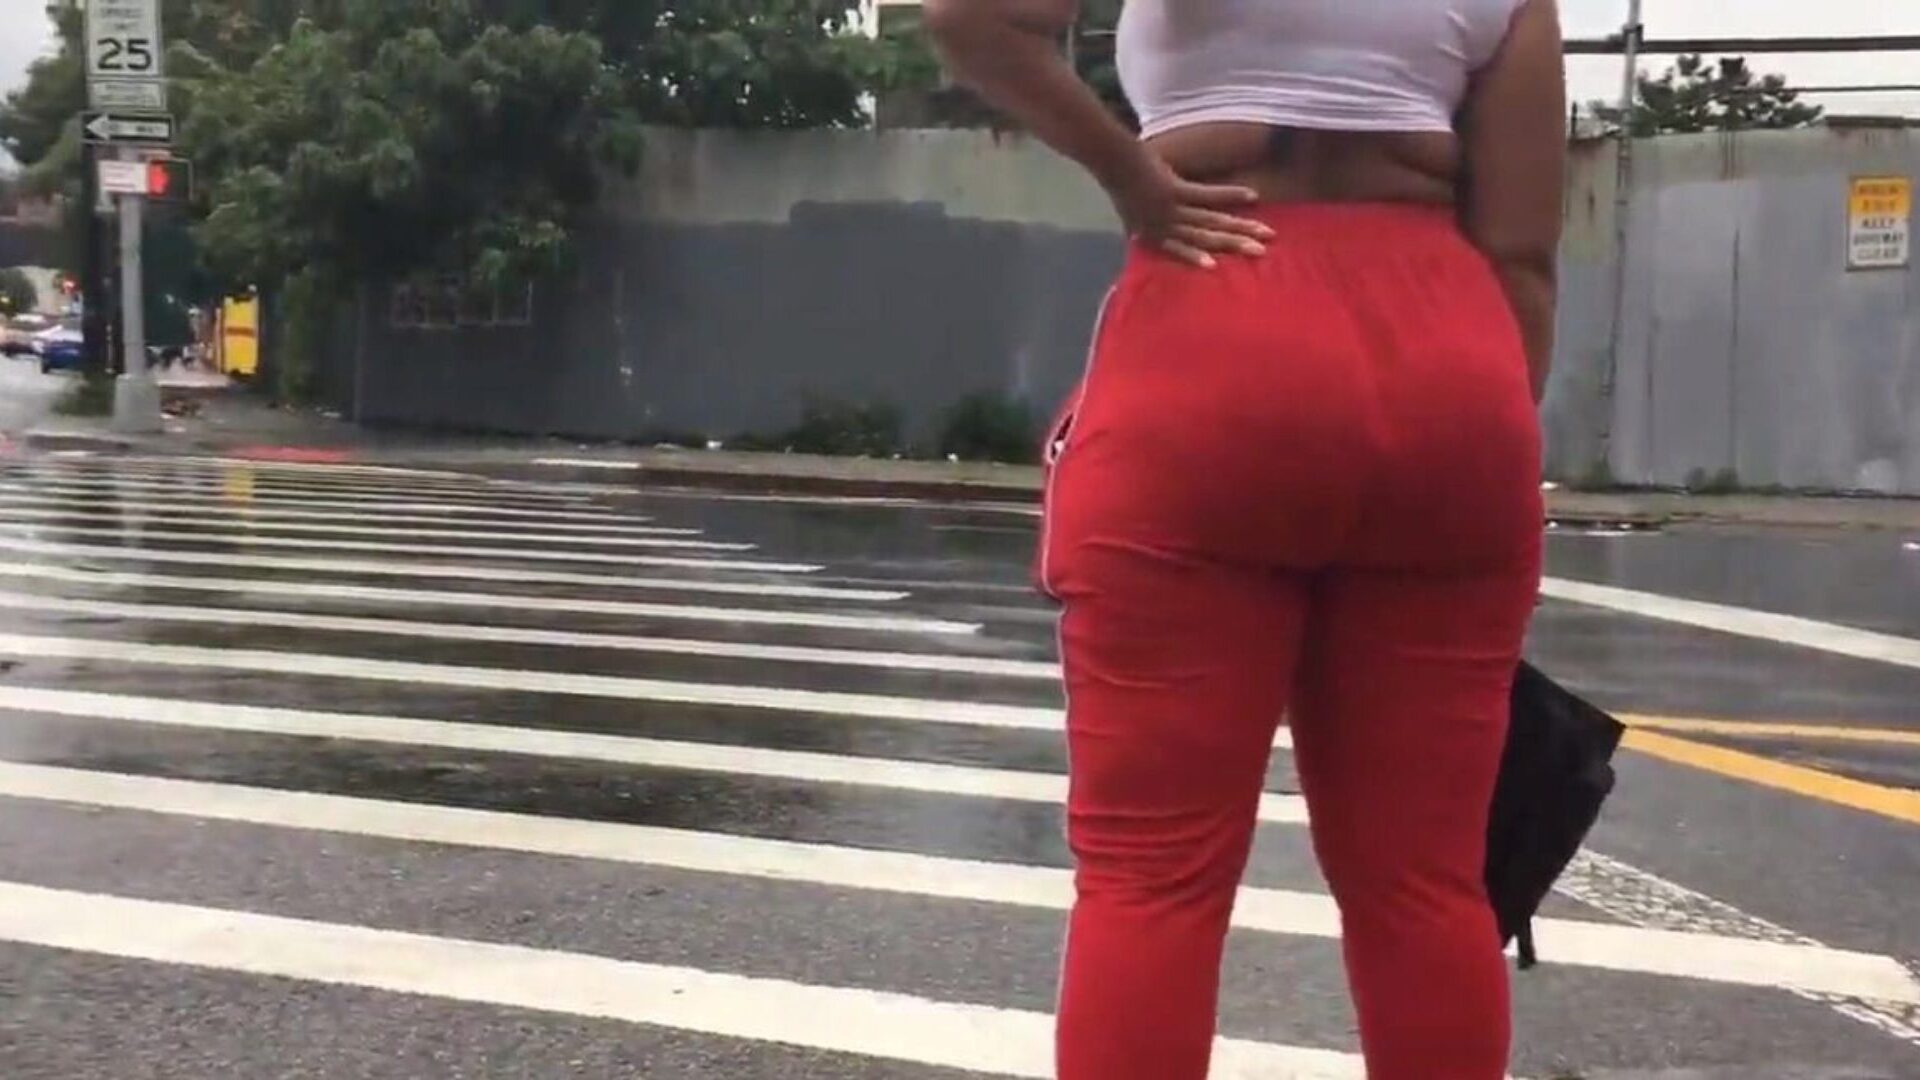 Tall Redbone Milf Ass in See-thru Spandex Part four This was the third time that I caught the (in)famous Rumpalicious last yr She eventually did sploog and confronted me about it but that was about it everybody now caught her anyway lol...Enjoy!!!